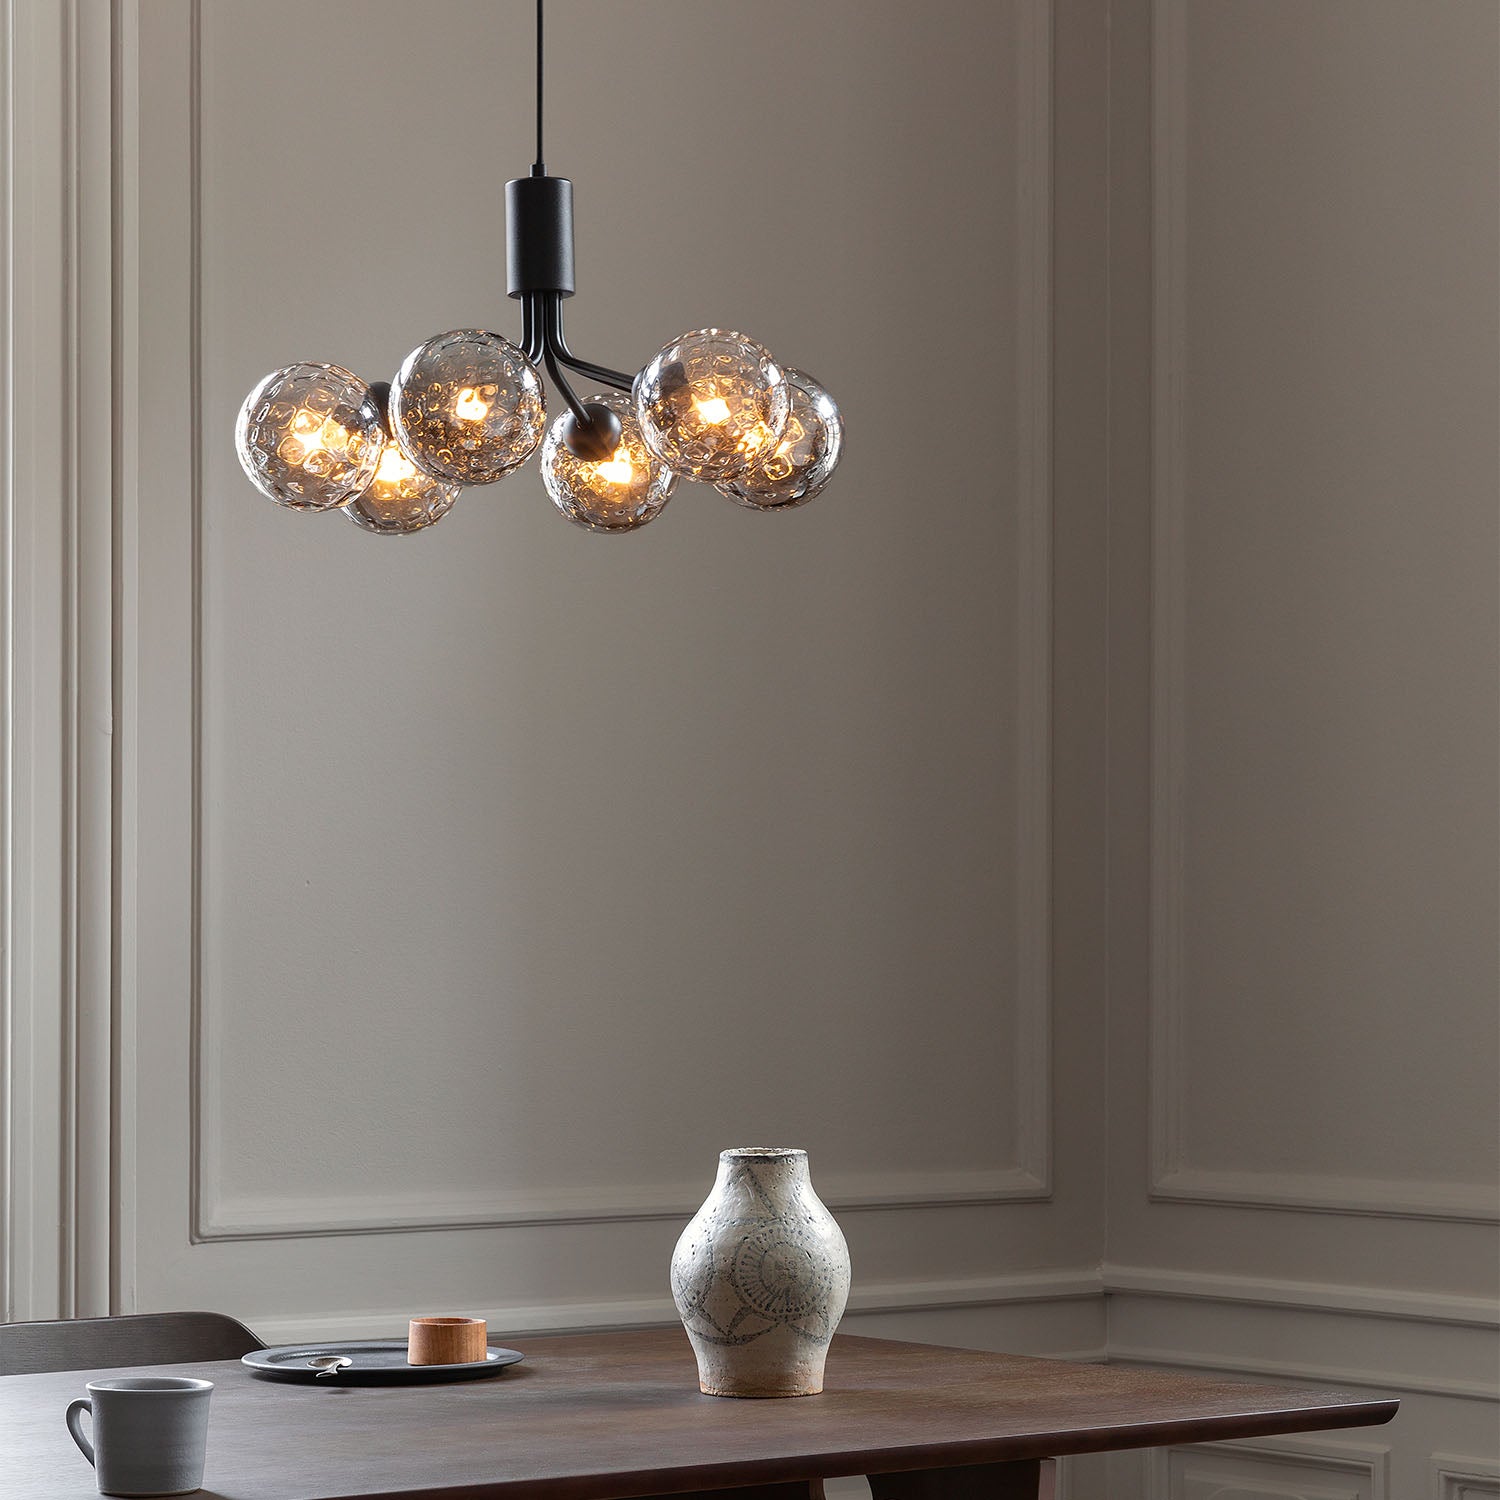 APIALES Optic - Black or gold chandelier with glass globes